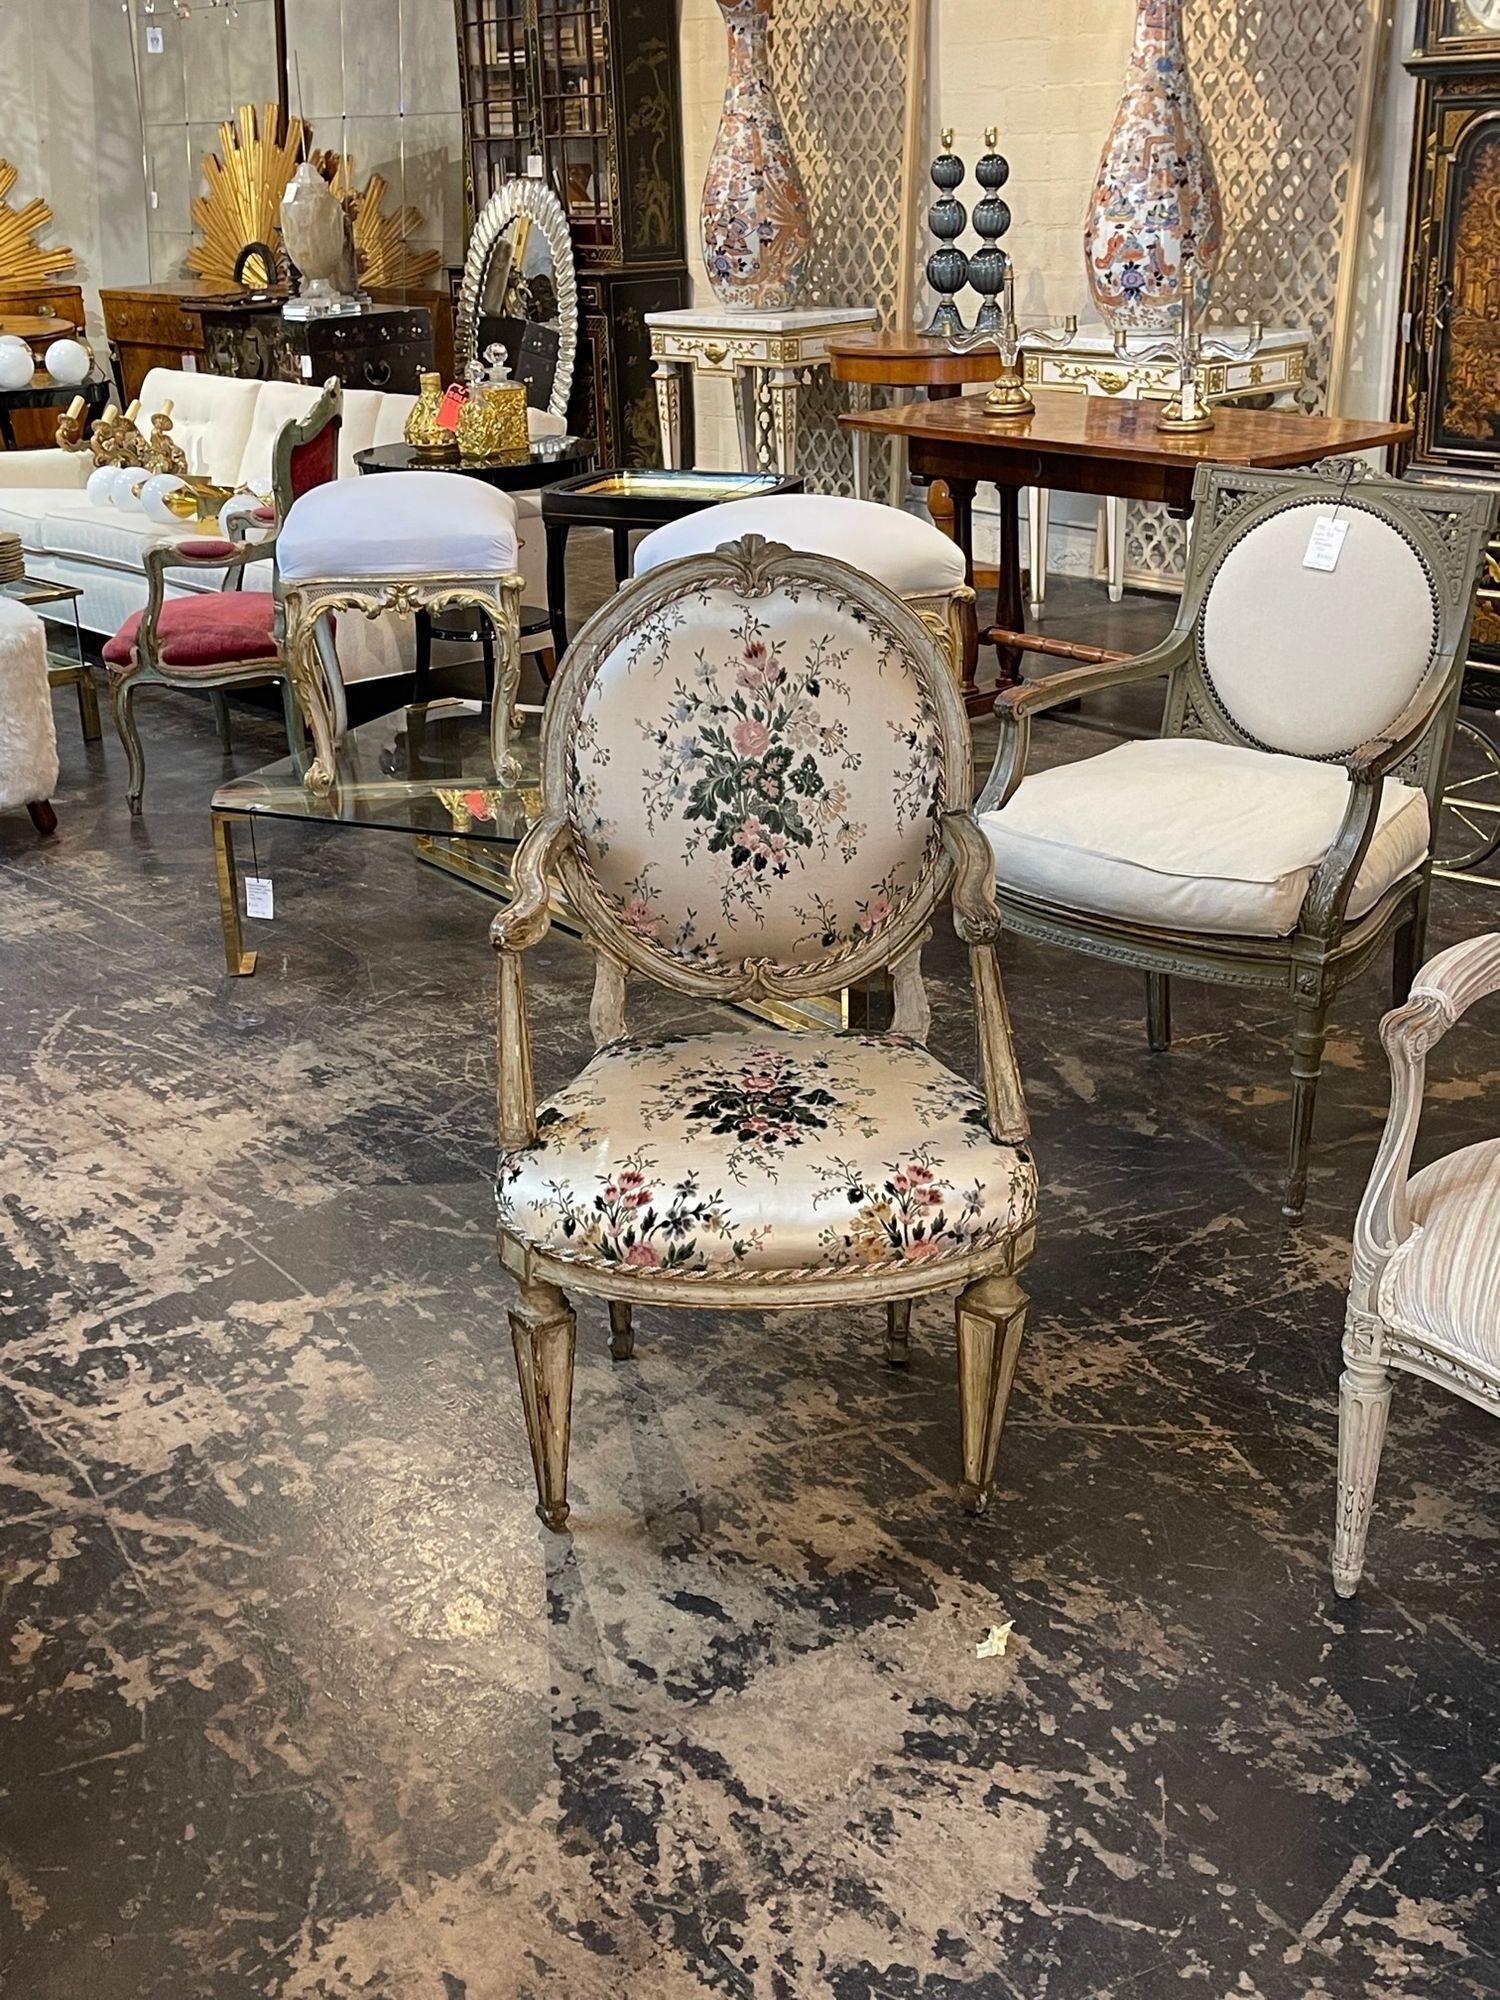 Very nice decorative 18th century Italian carved and painted armchair upholstered in a lovely floral fabric. A beautiful accent piece with really nice carvings and patina! Gorgeous!